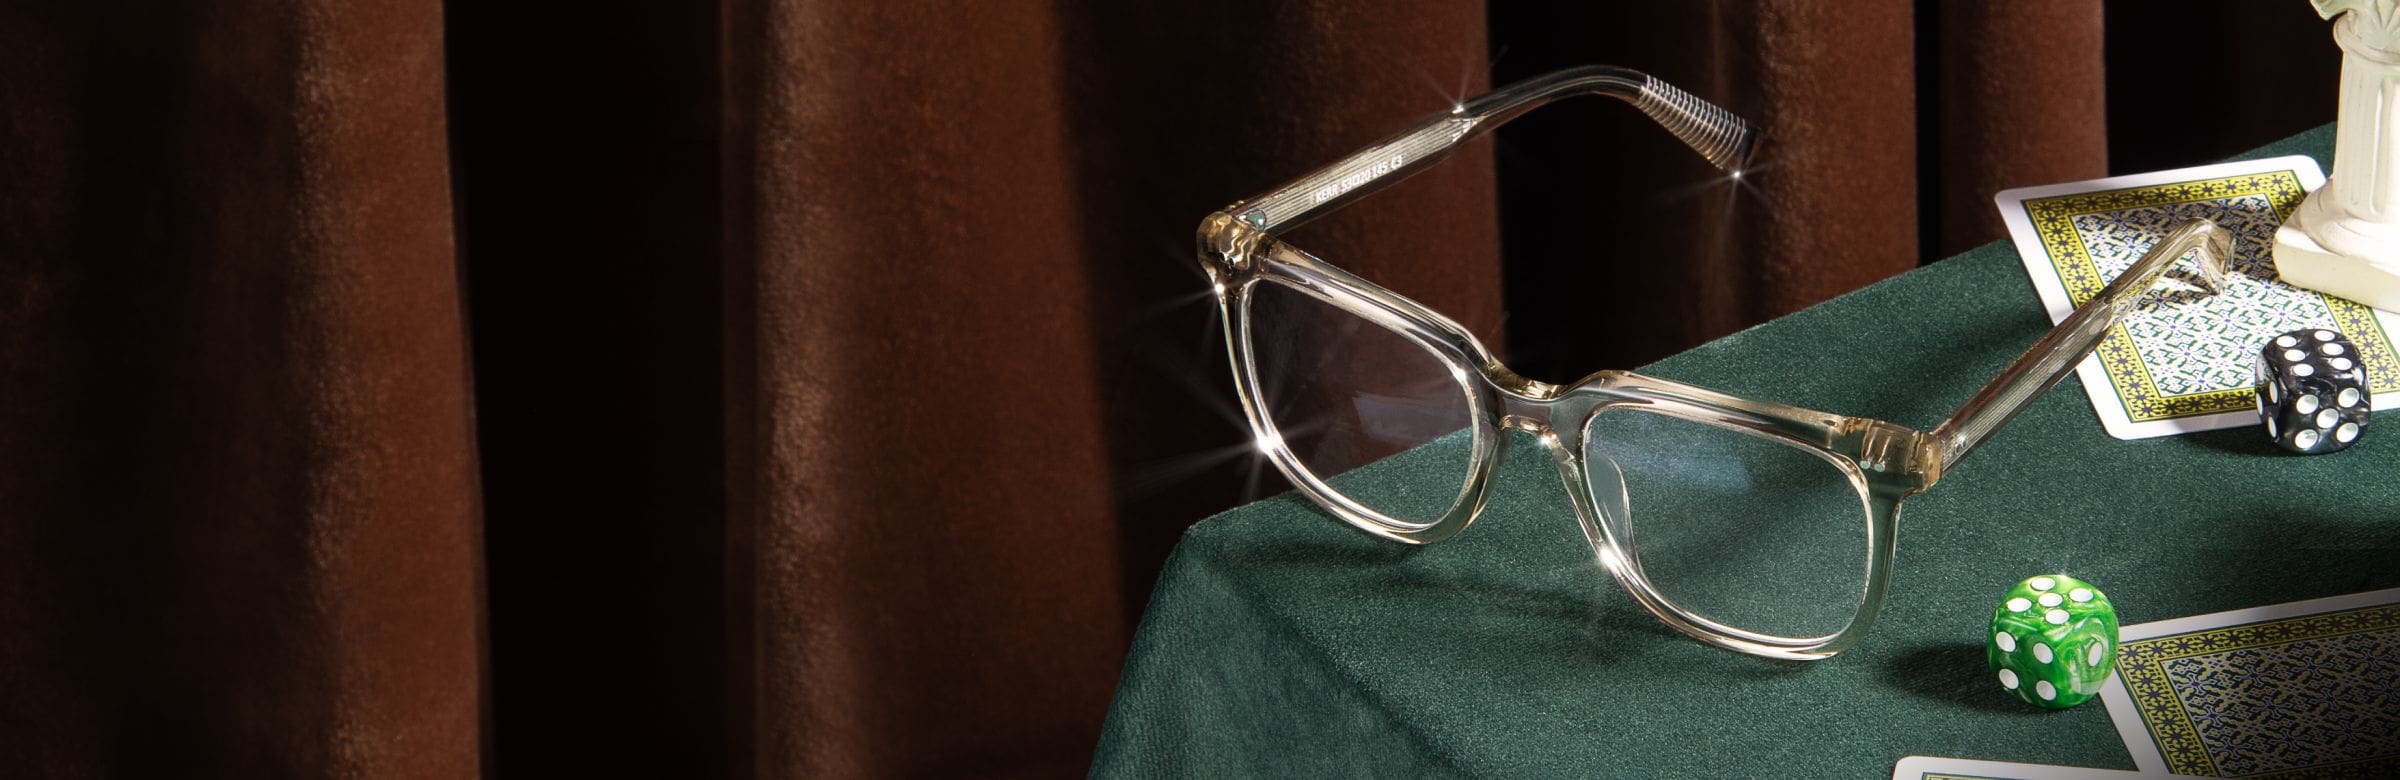 A collection of classic eyewear with a creative edge.